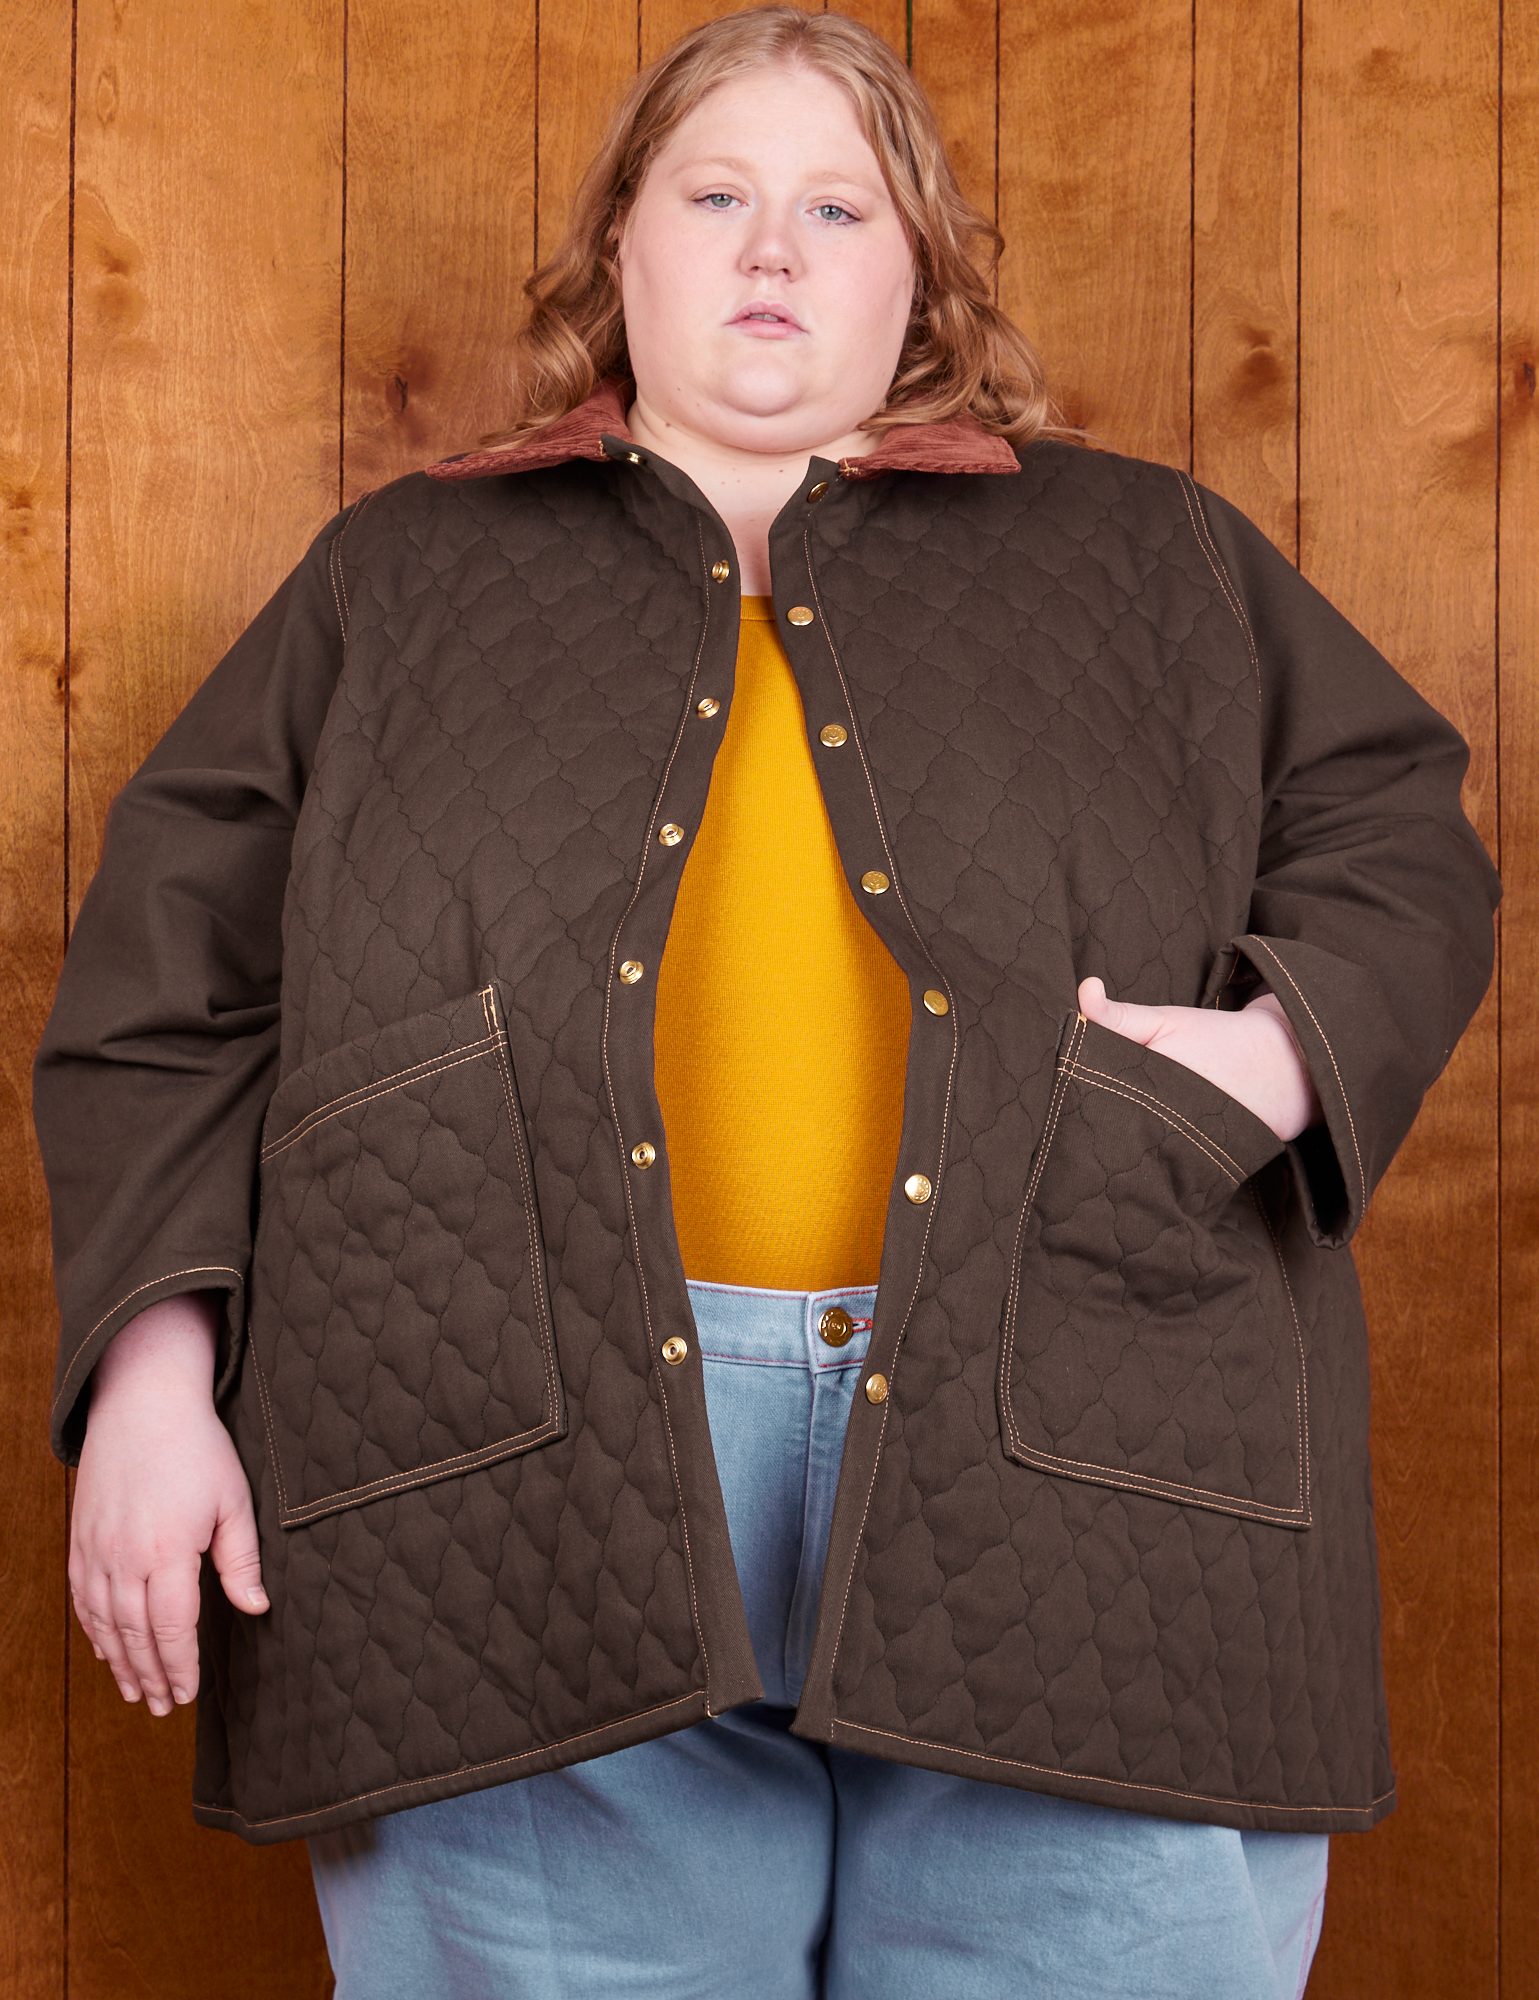 Catie is 5&#39;11&quot; and wearing 5XL Quilted Overcoat in Espresso Brown